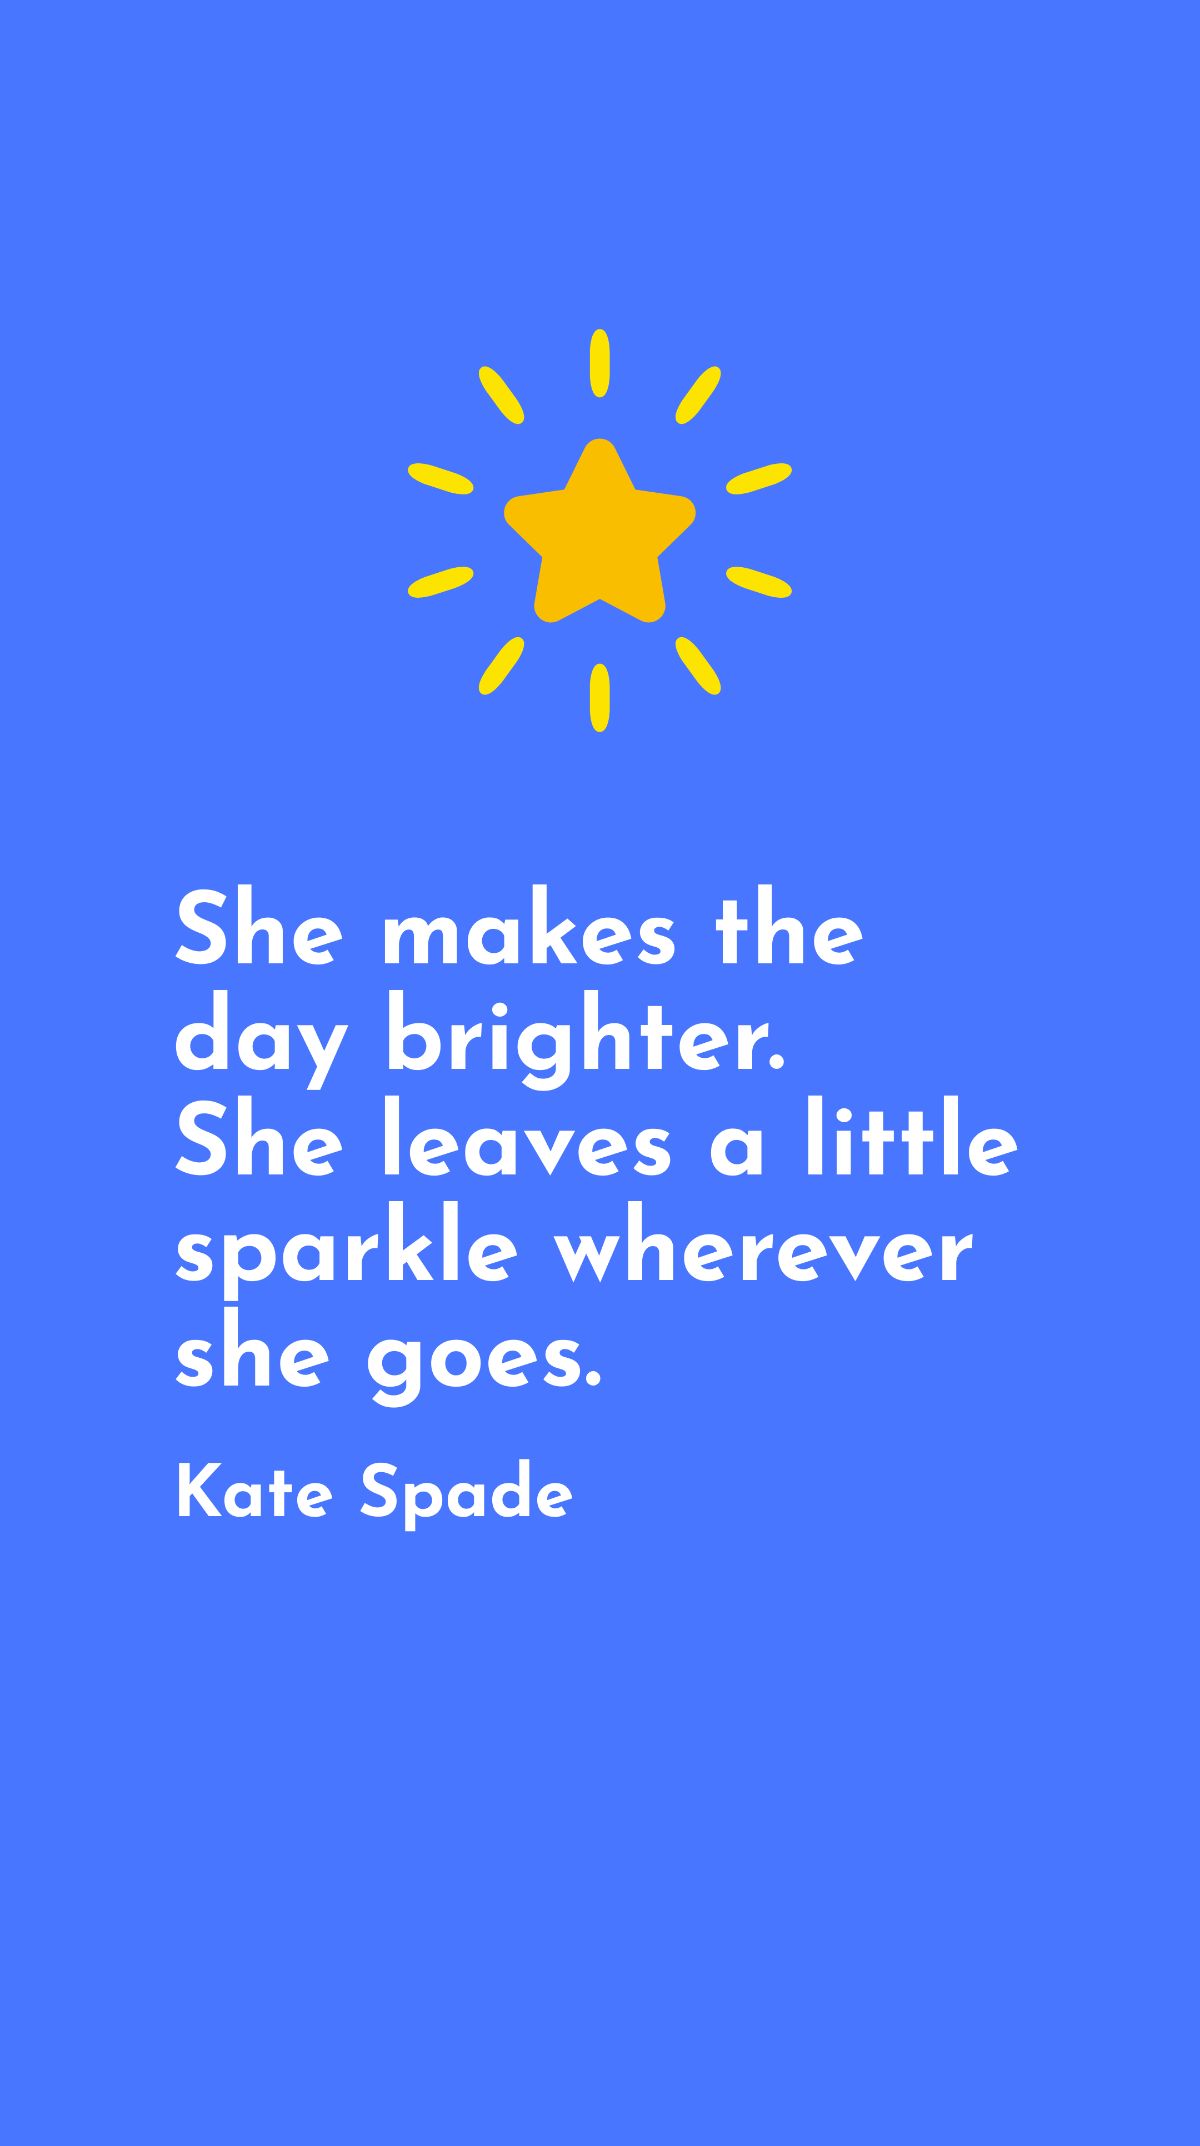 Kate Spade - She makes the day brighter. She leaves a little sparkle wherever she goes.